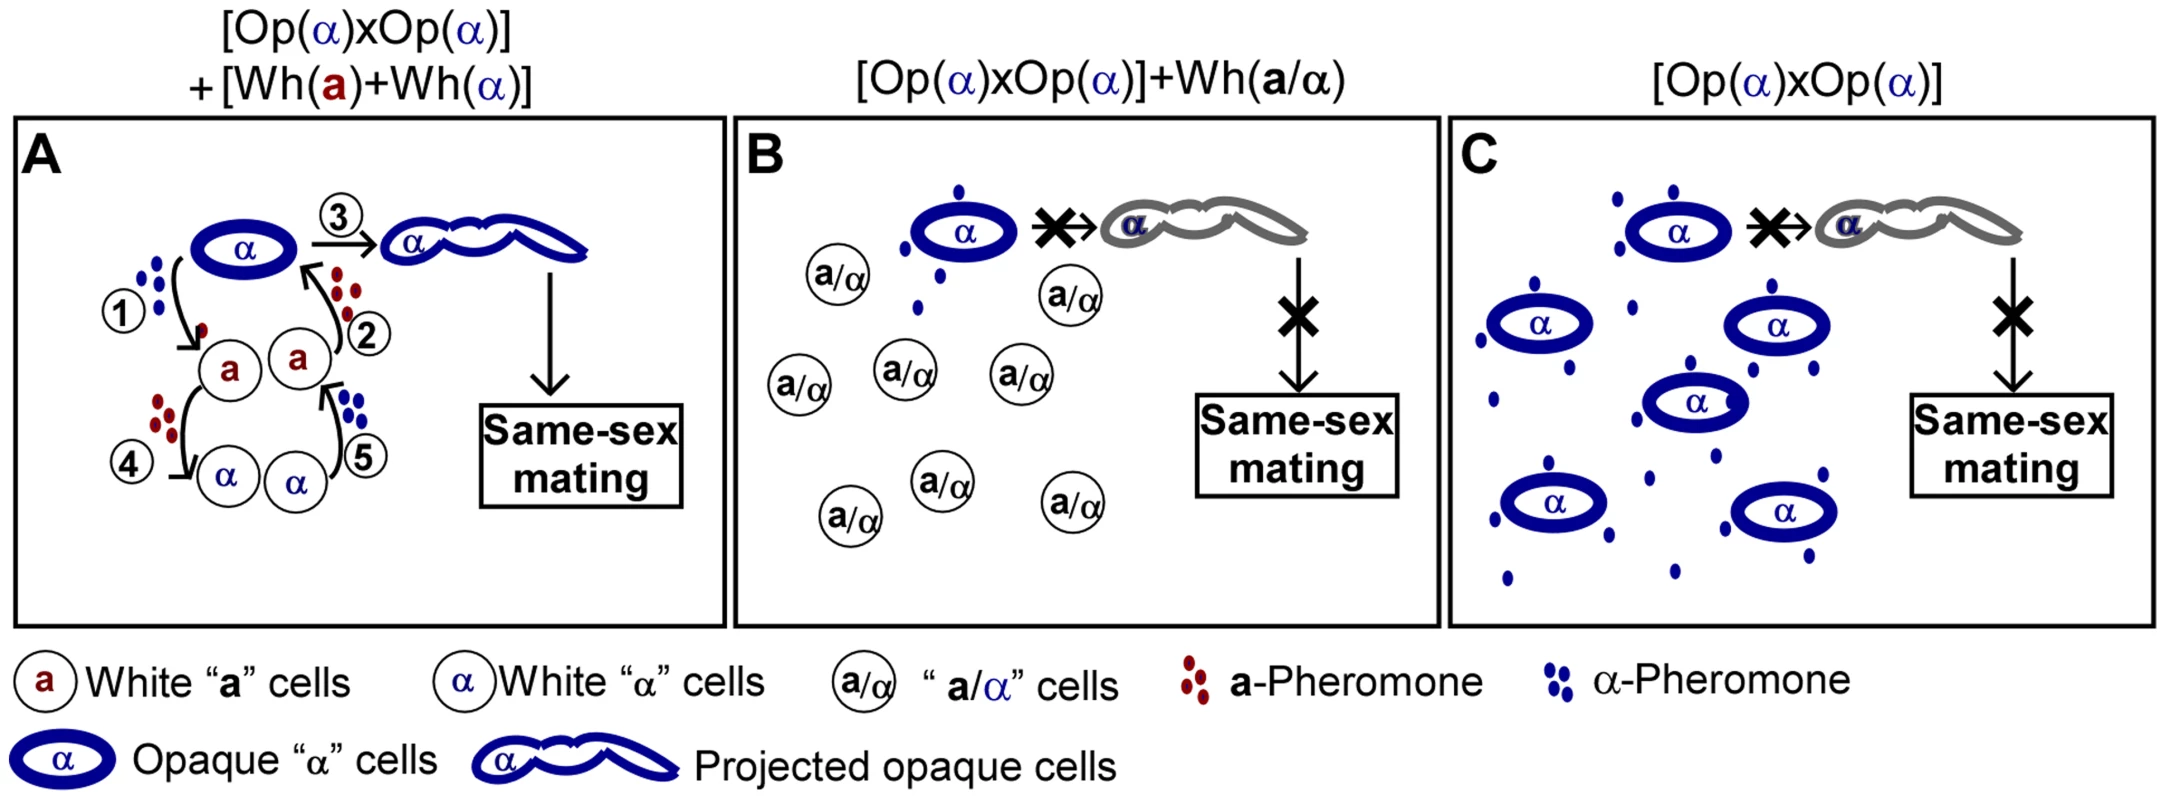 Schematic models depicting that white cells facilitate same-sex mating of opaque cells.